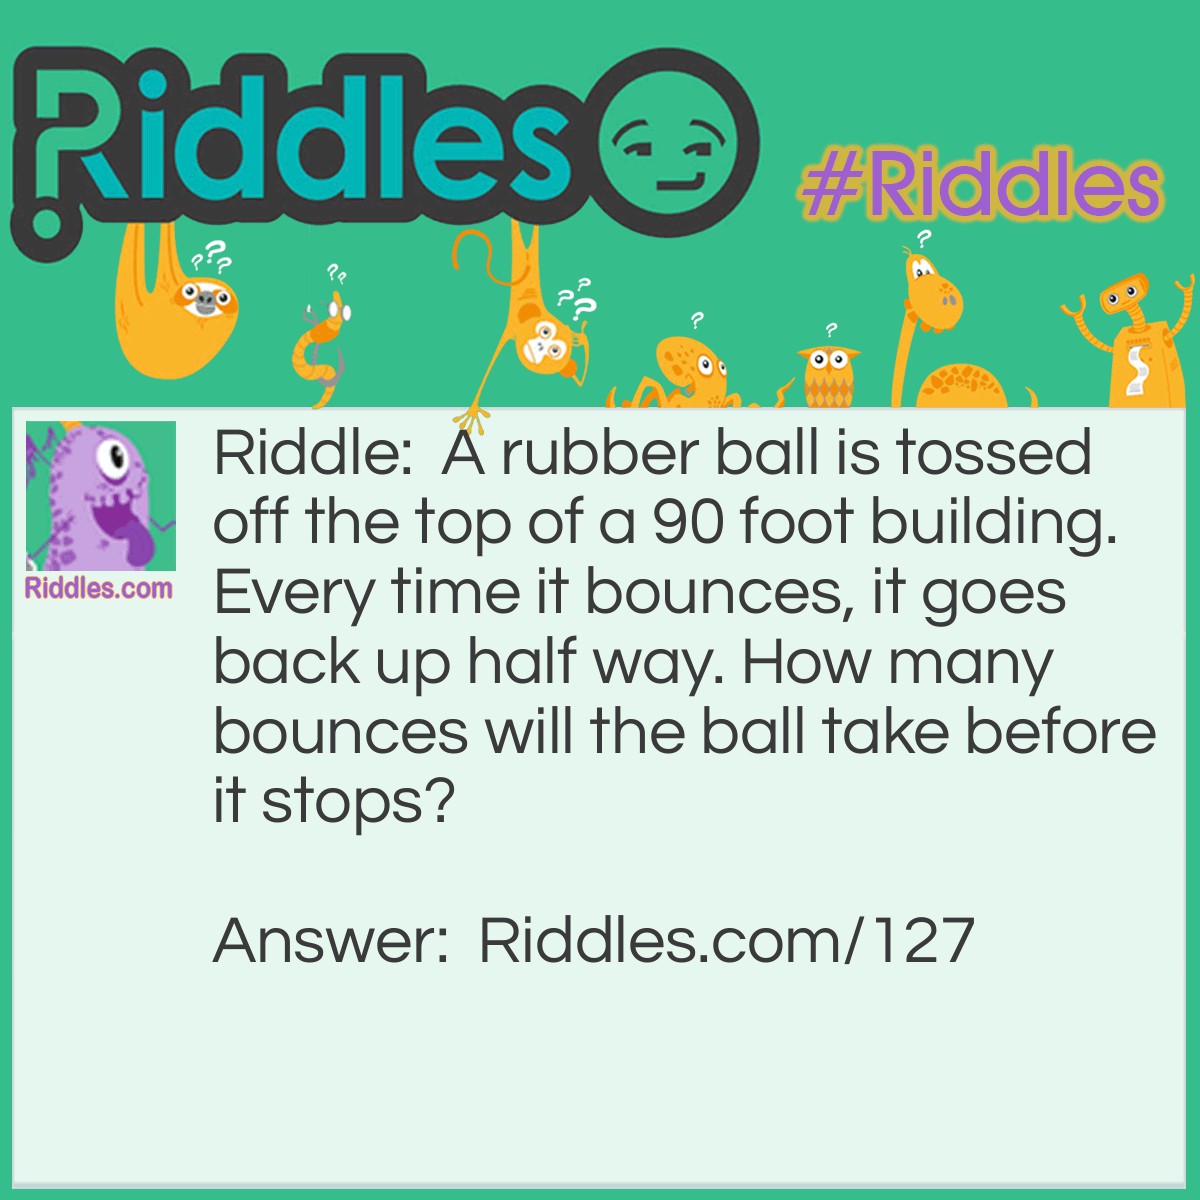 Riddle: A rubber ball is tossed off the top of a 90 foot building. Every time it bounces, it goes back up half way. How many bounces will the ball take before it stops? Answer: The answer is infinite, in a gravity free world. But of course gravity will eventually stop it.